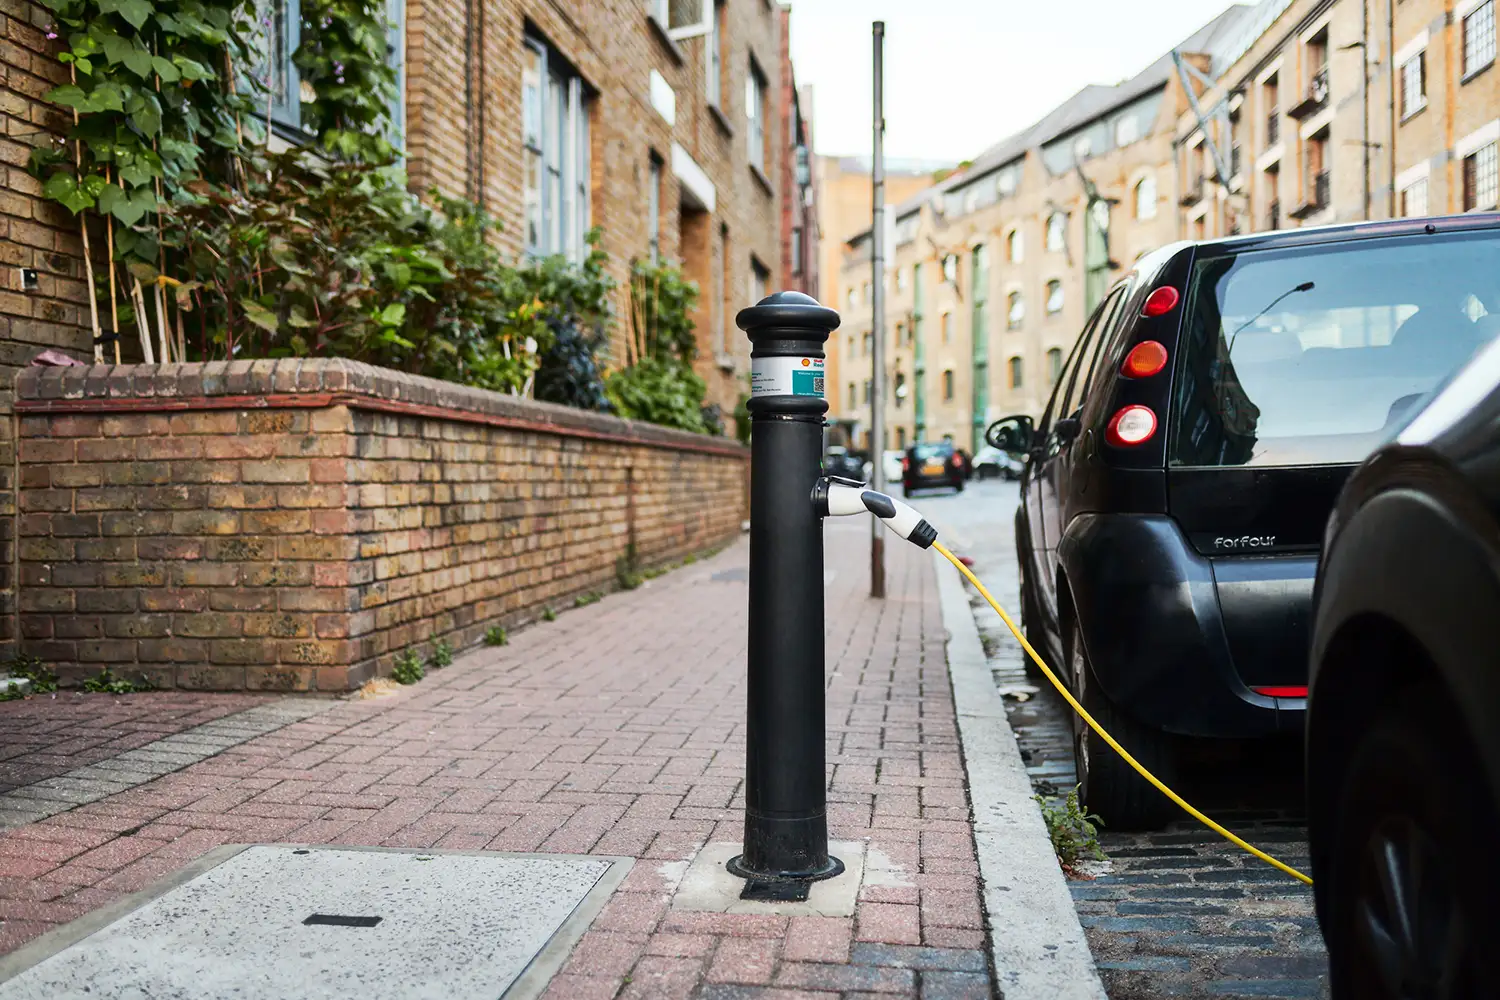 An electric vehicle is charging at an ubitricity-operated bollard charging station, used by local authorities to install EV chargers in residential areas.